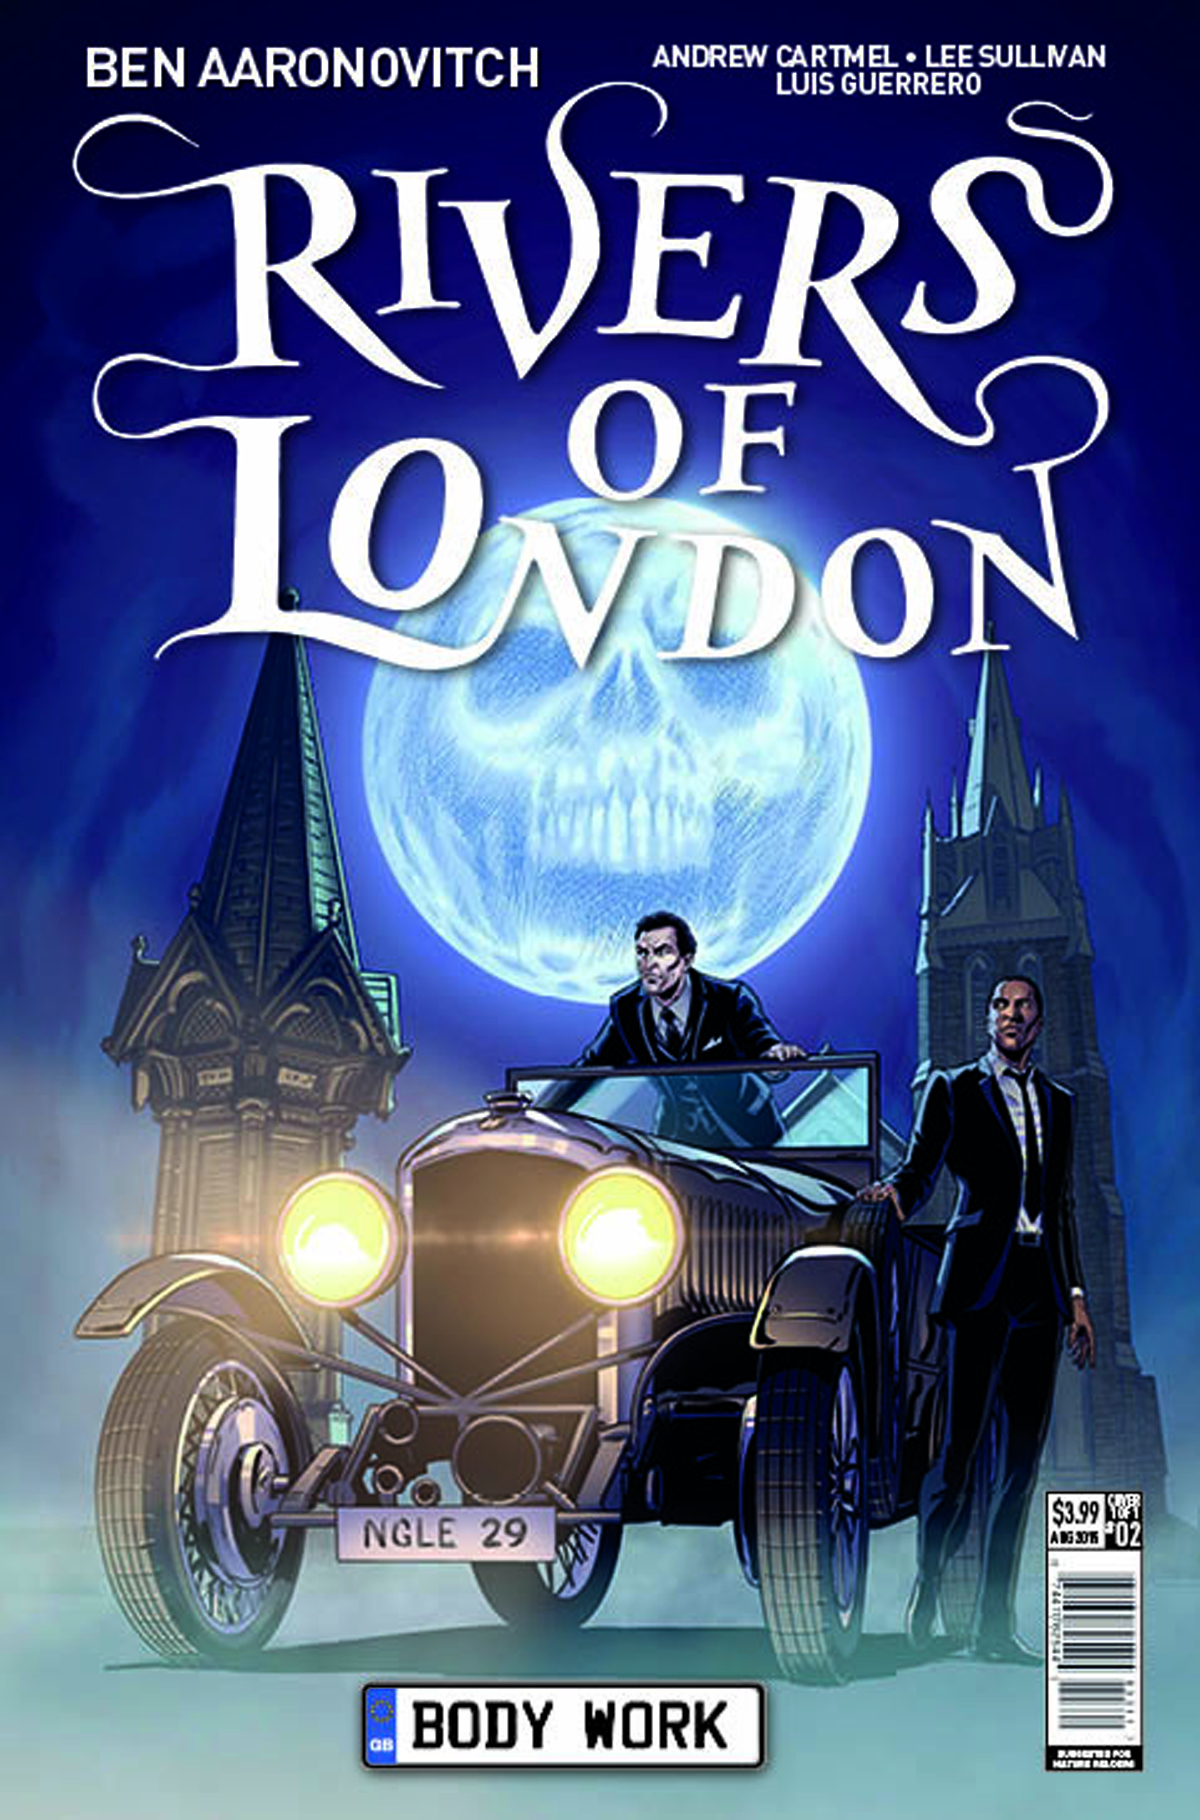 RIVERS OF LONDON #2 (OF 5) (MR)